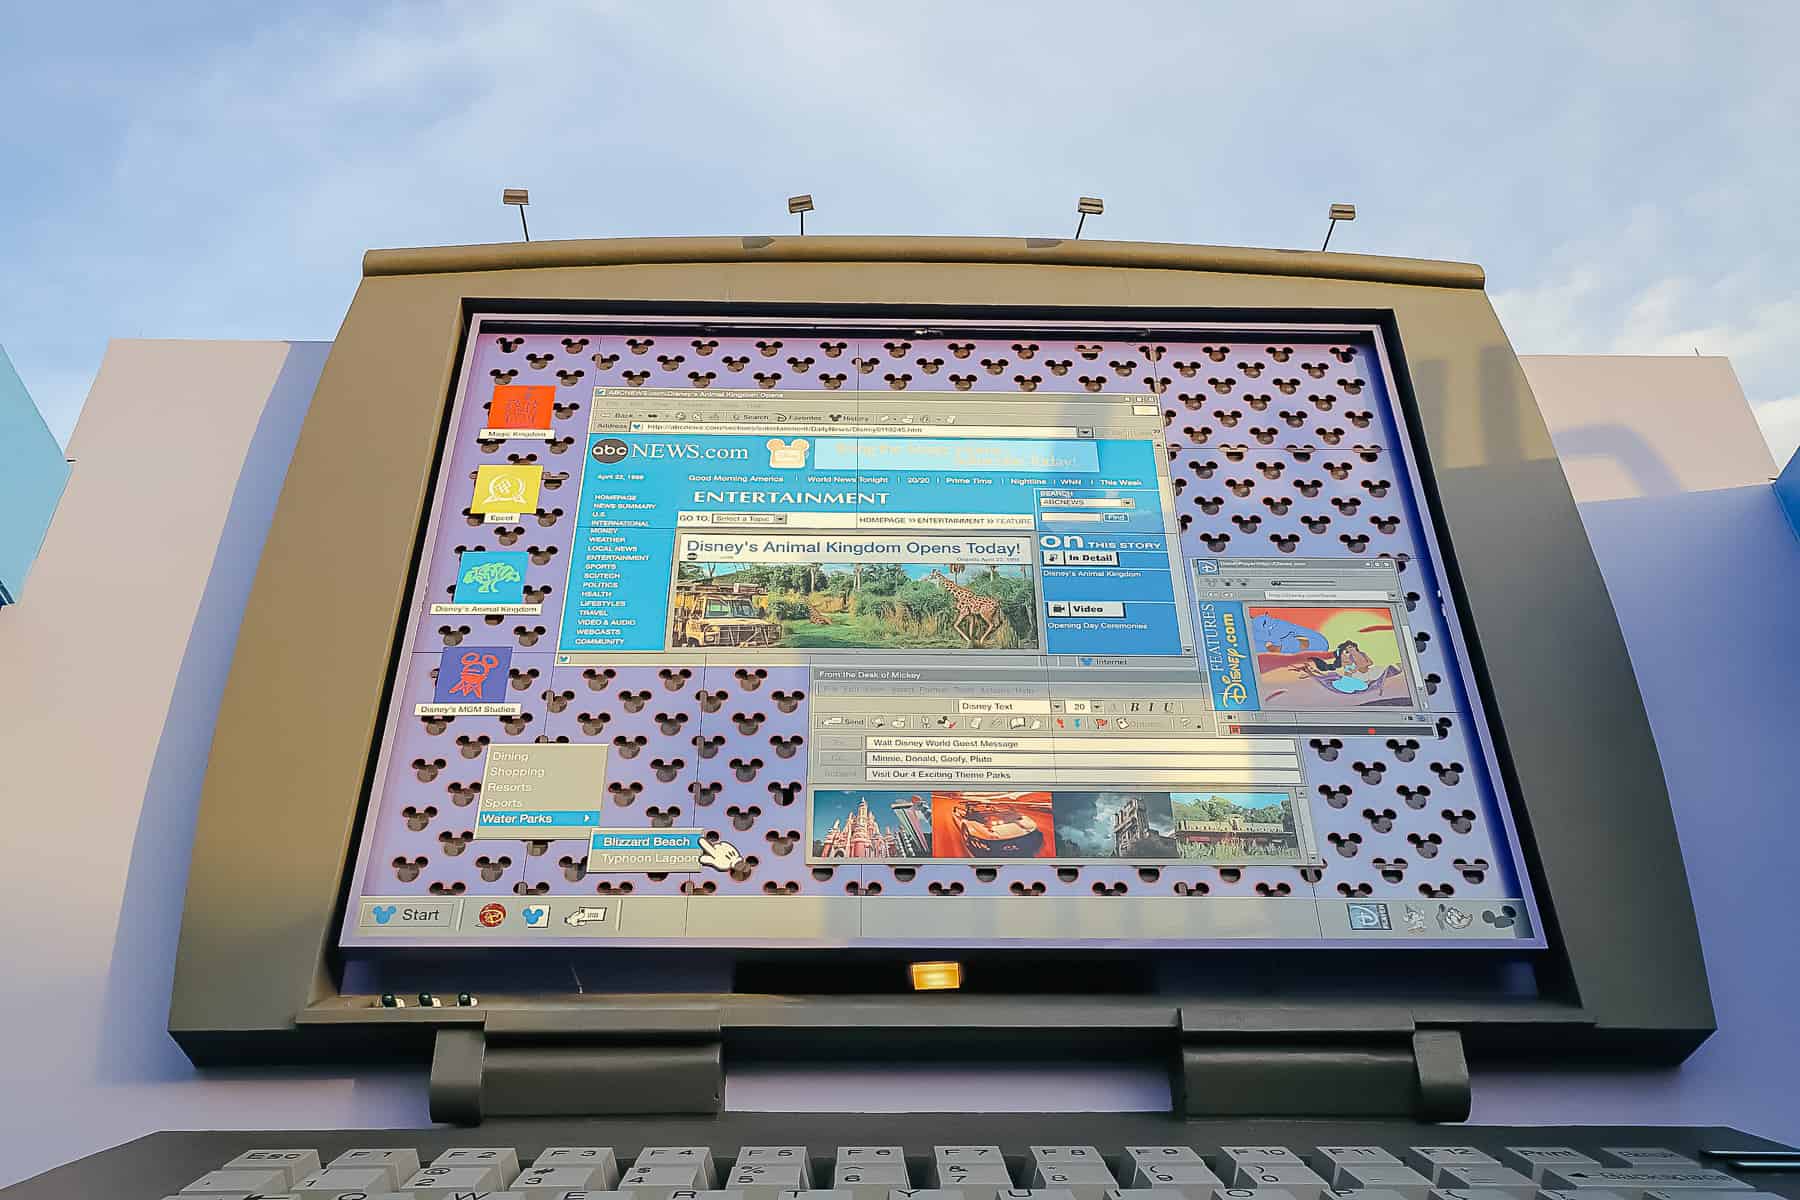 The laptop screen reflects the day Disney's Animal Kingdom opened and other fun Disney references. 